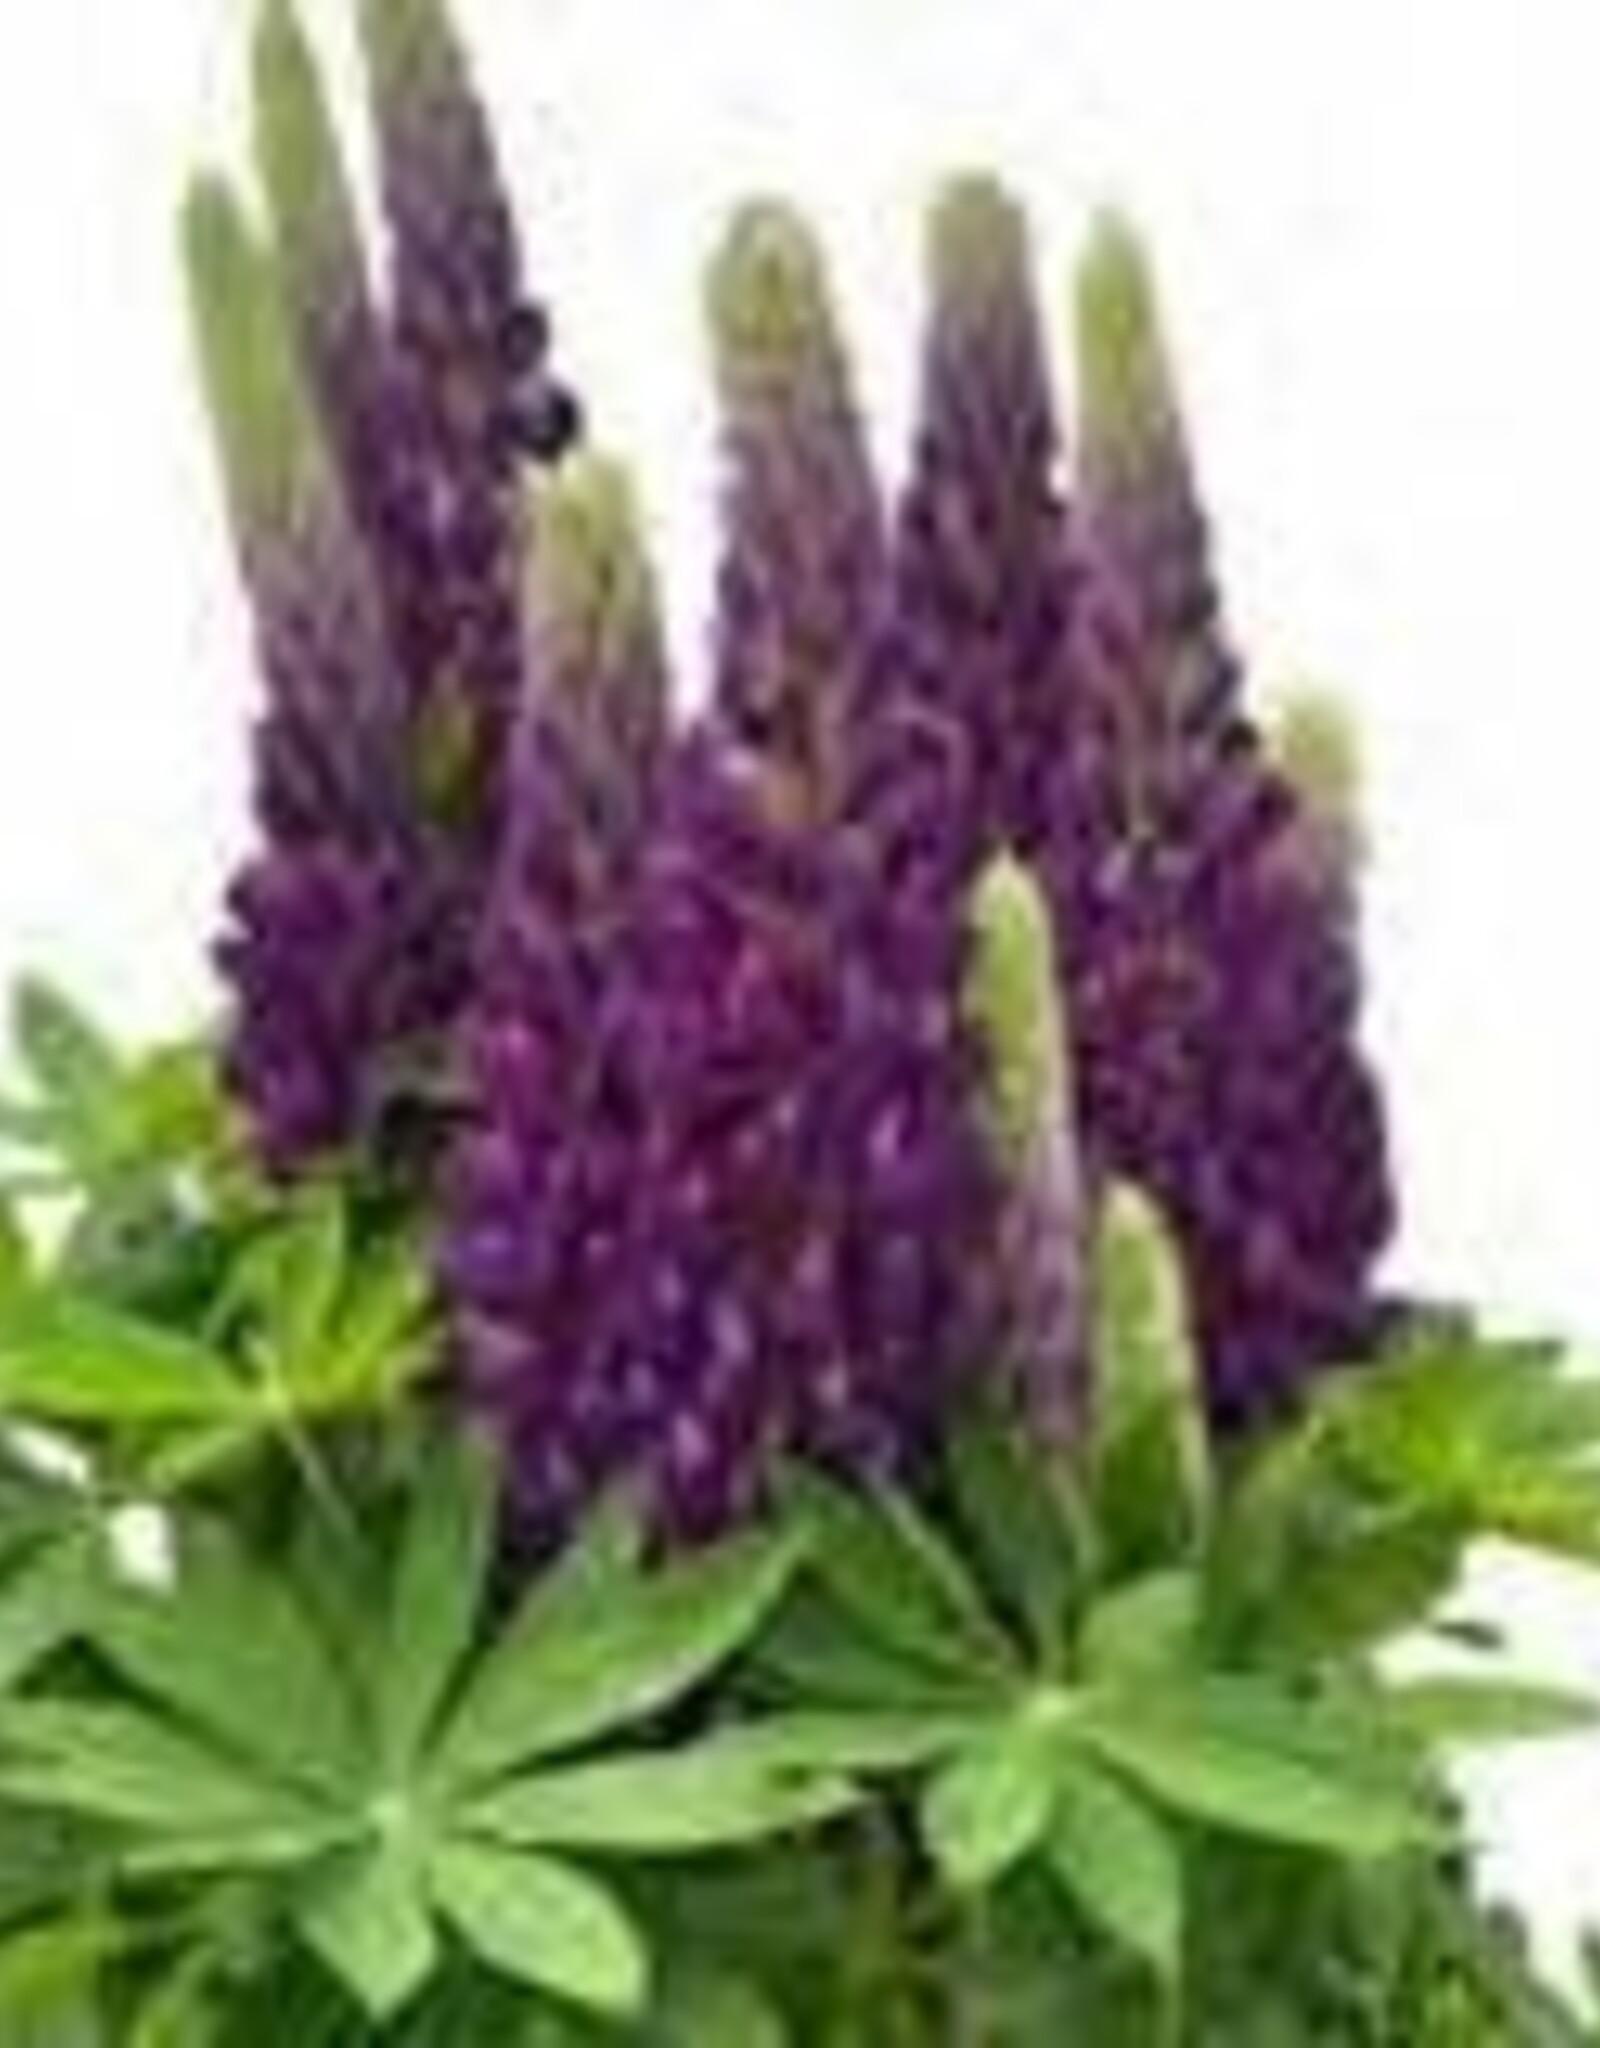 Gulley Greenhouse Lupinus 'Staircase Purple' Lupine #1